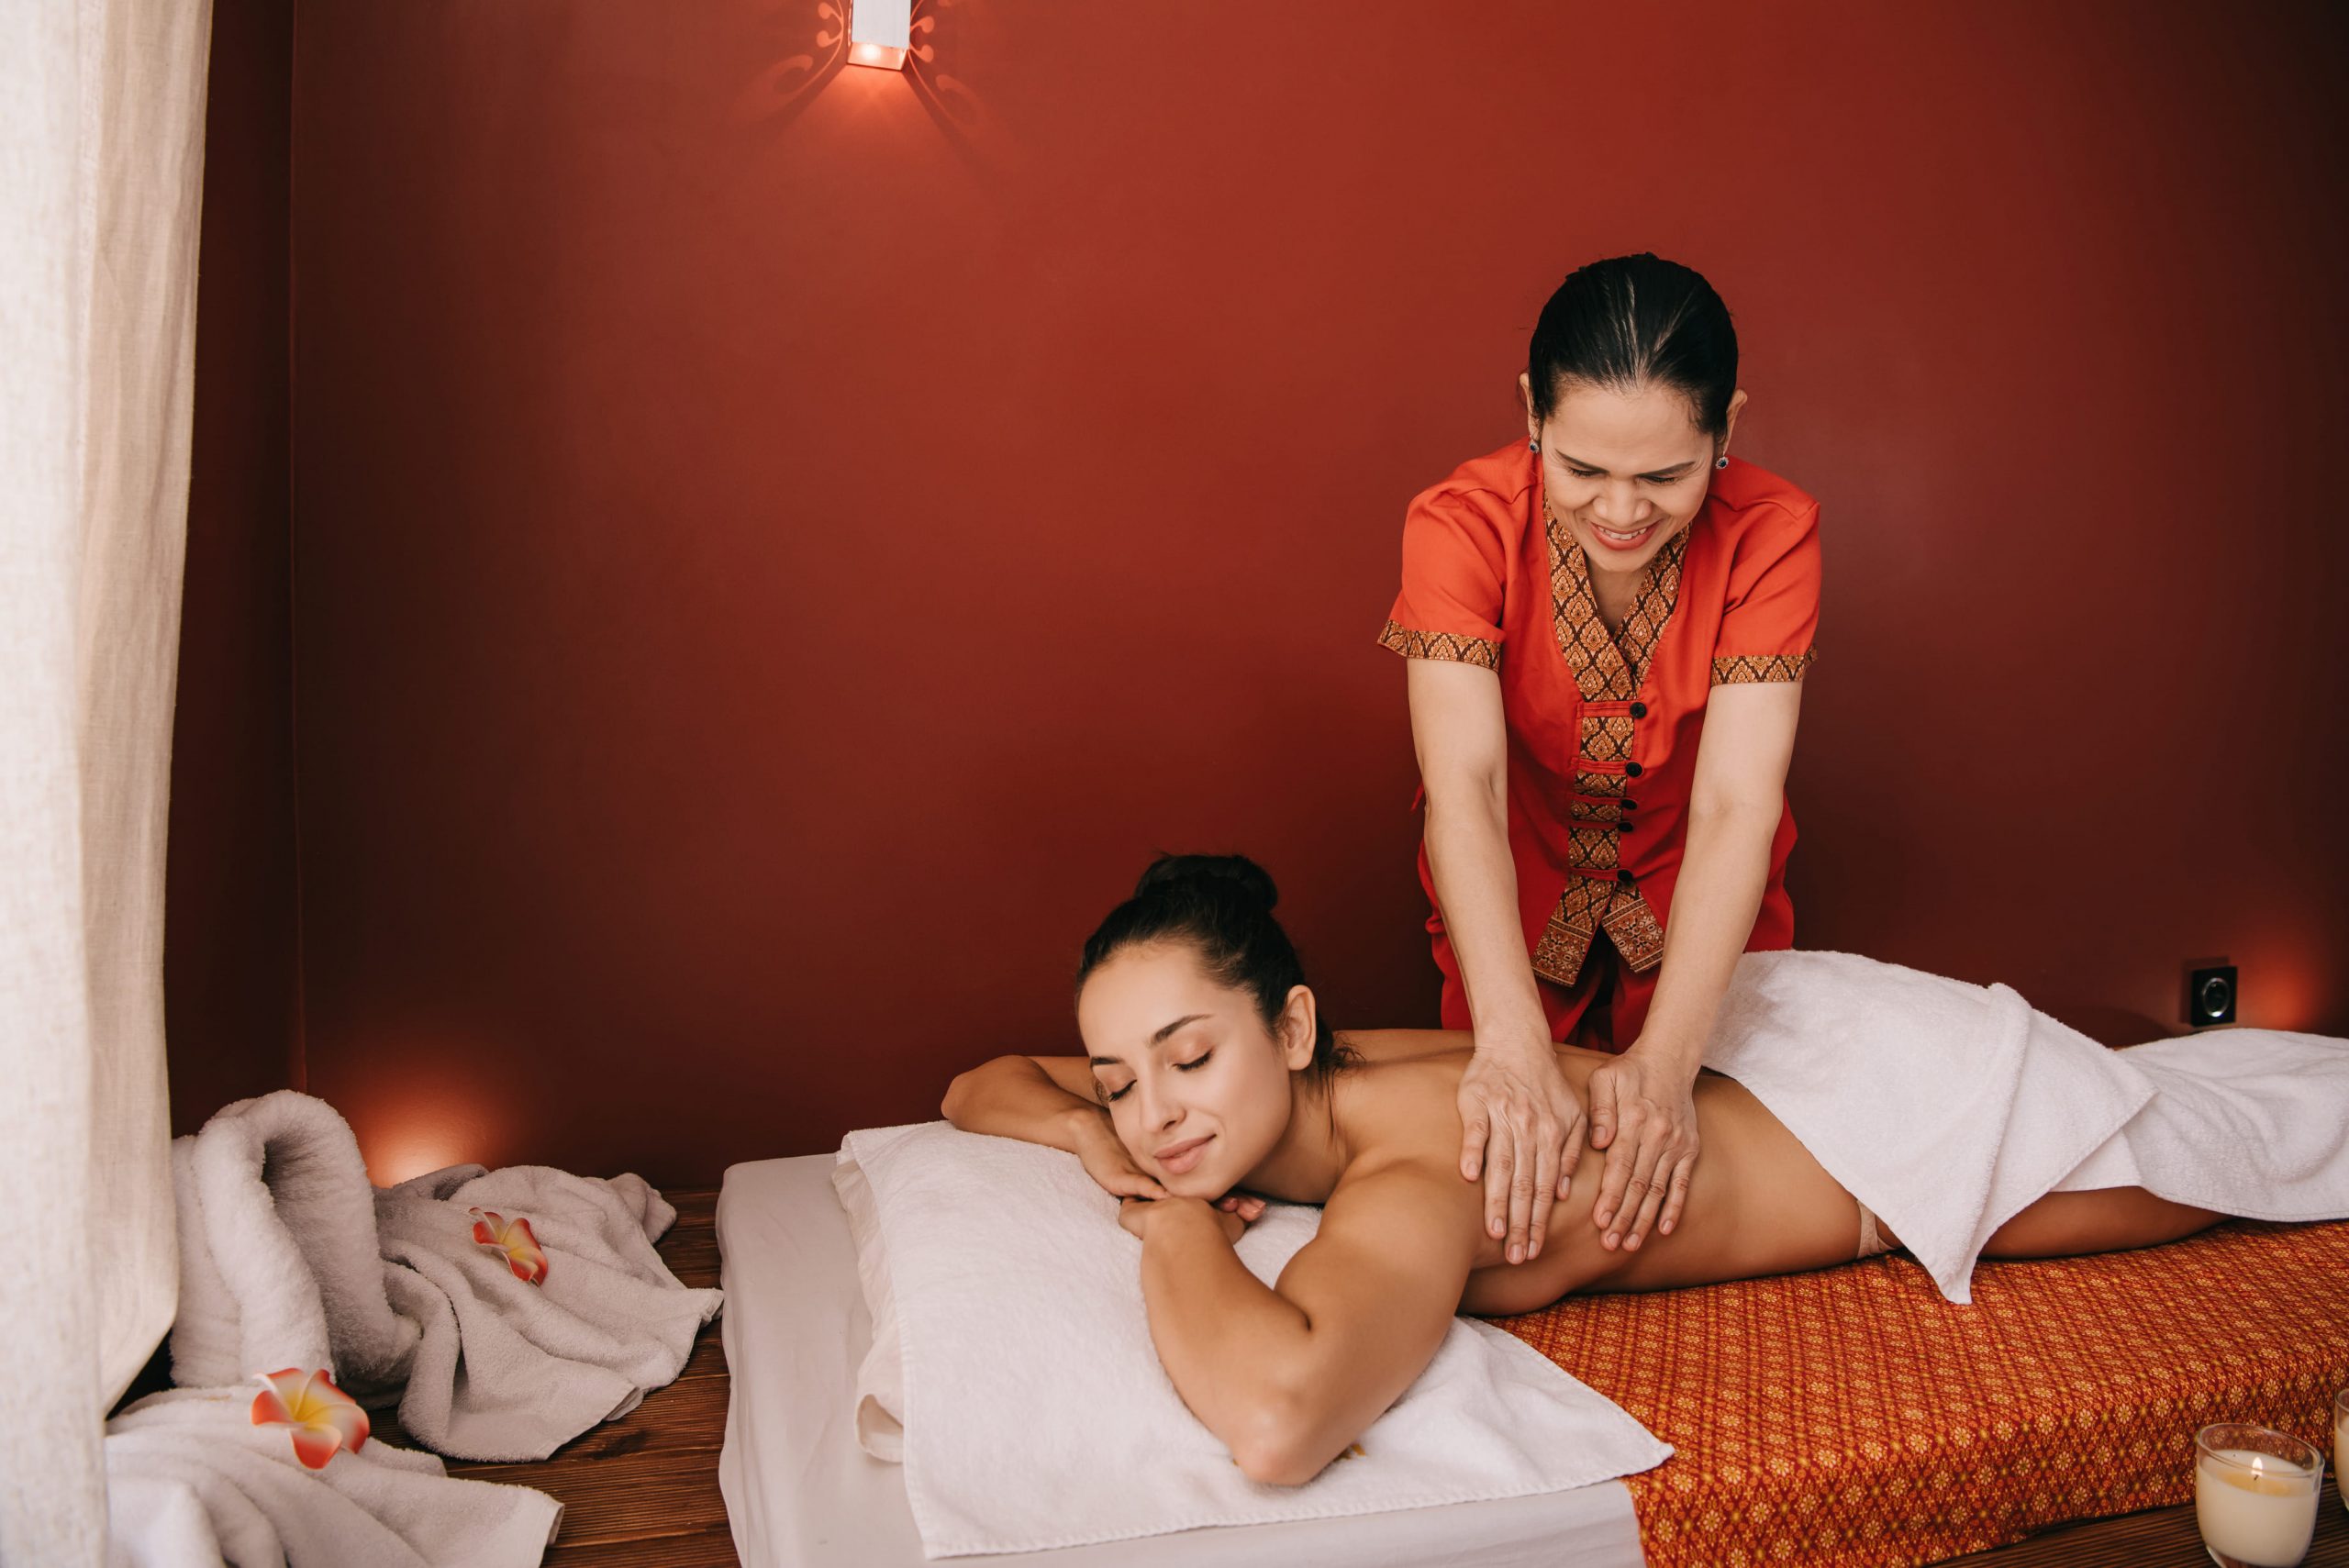 How often should you get a Thai massage? Can a Thai massage do damage? Why is Thai massage famous?